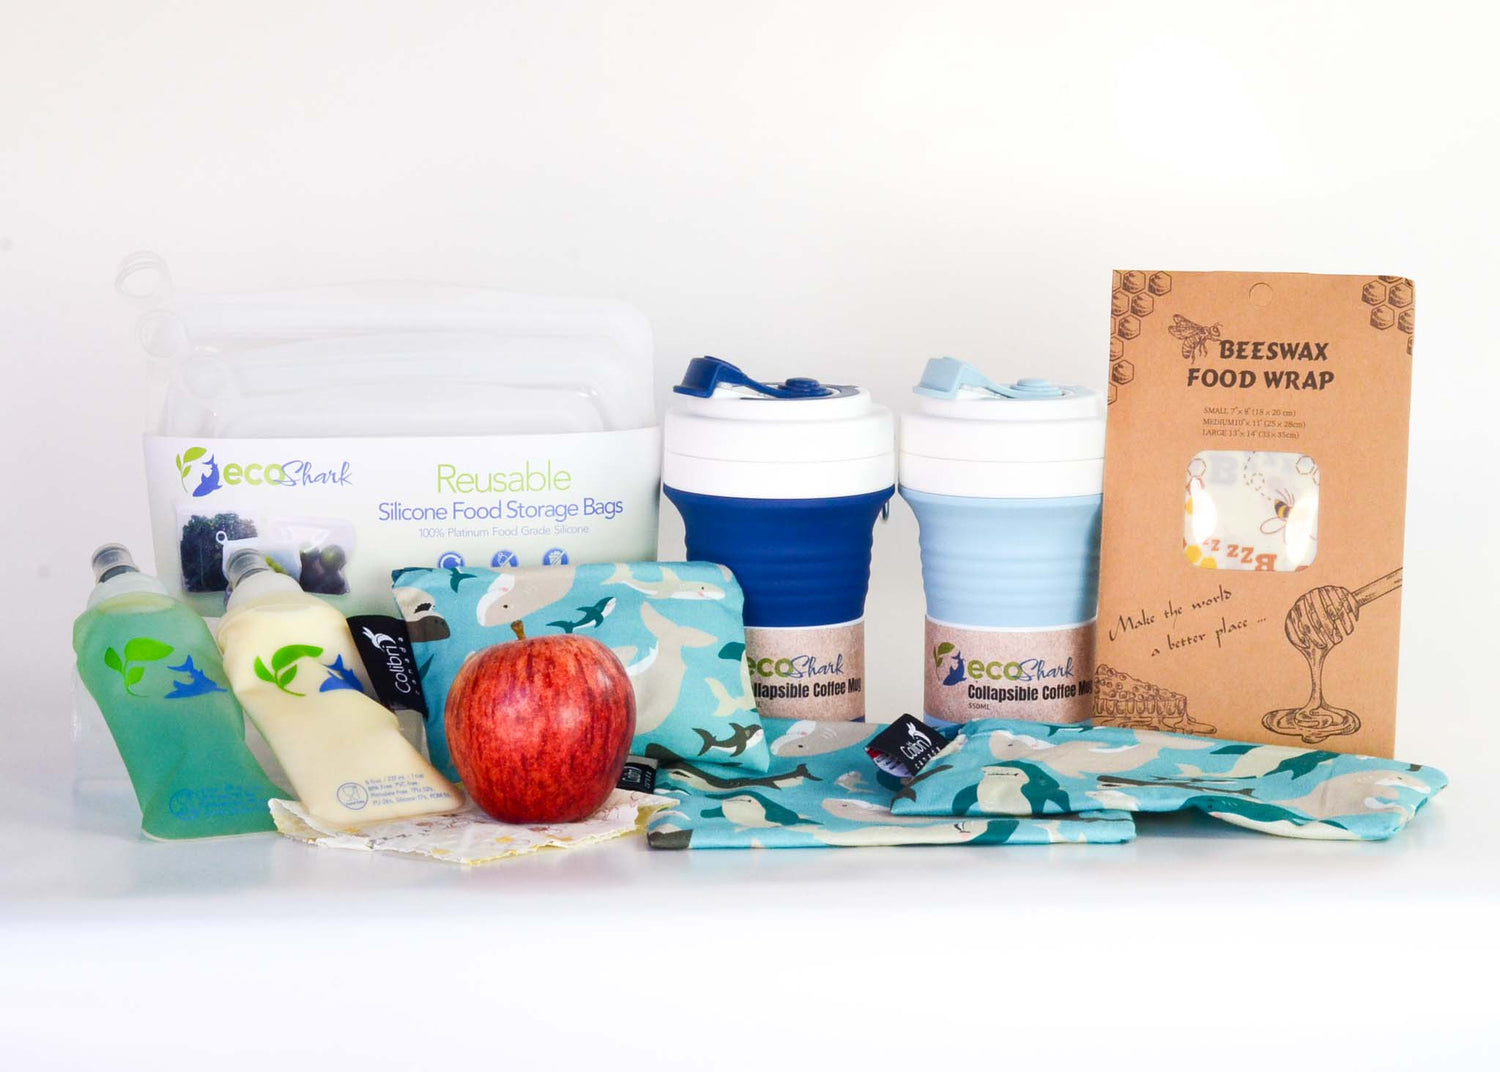 Eco Shark's Reusable Food Storage Collection for litterless lunches